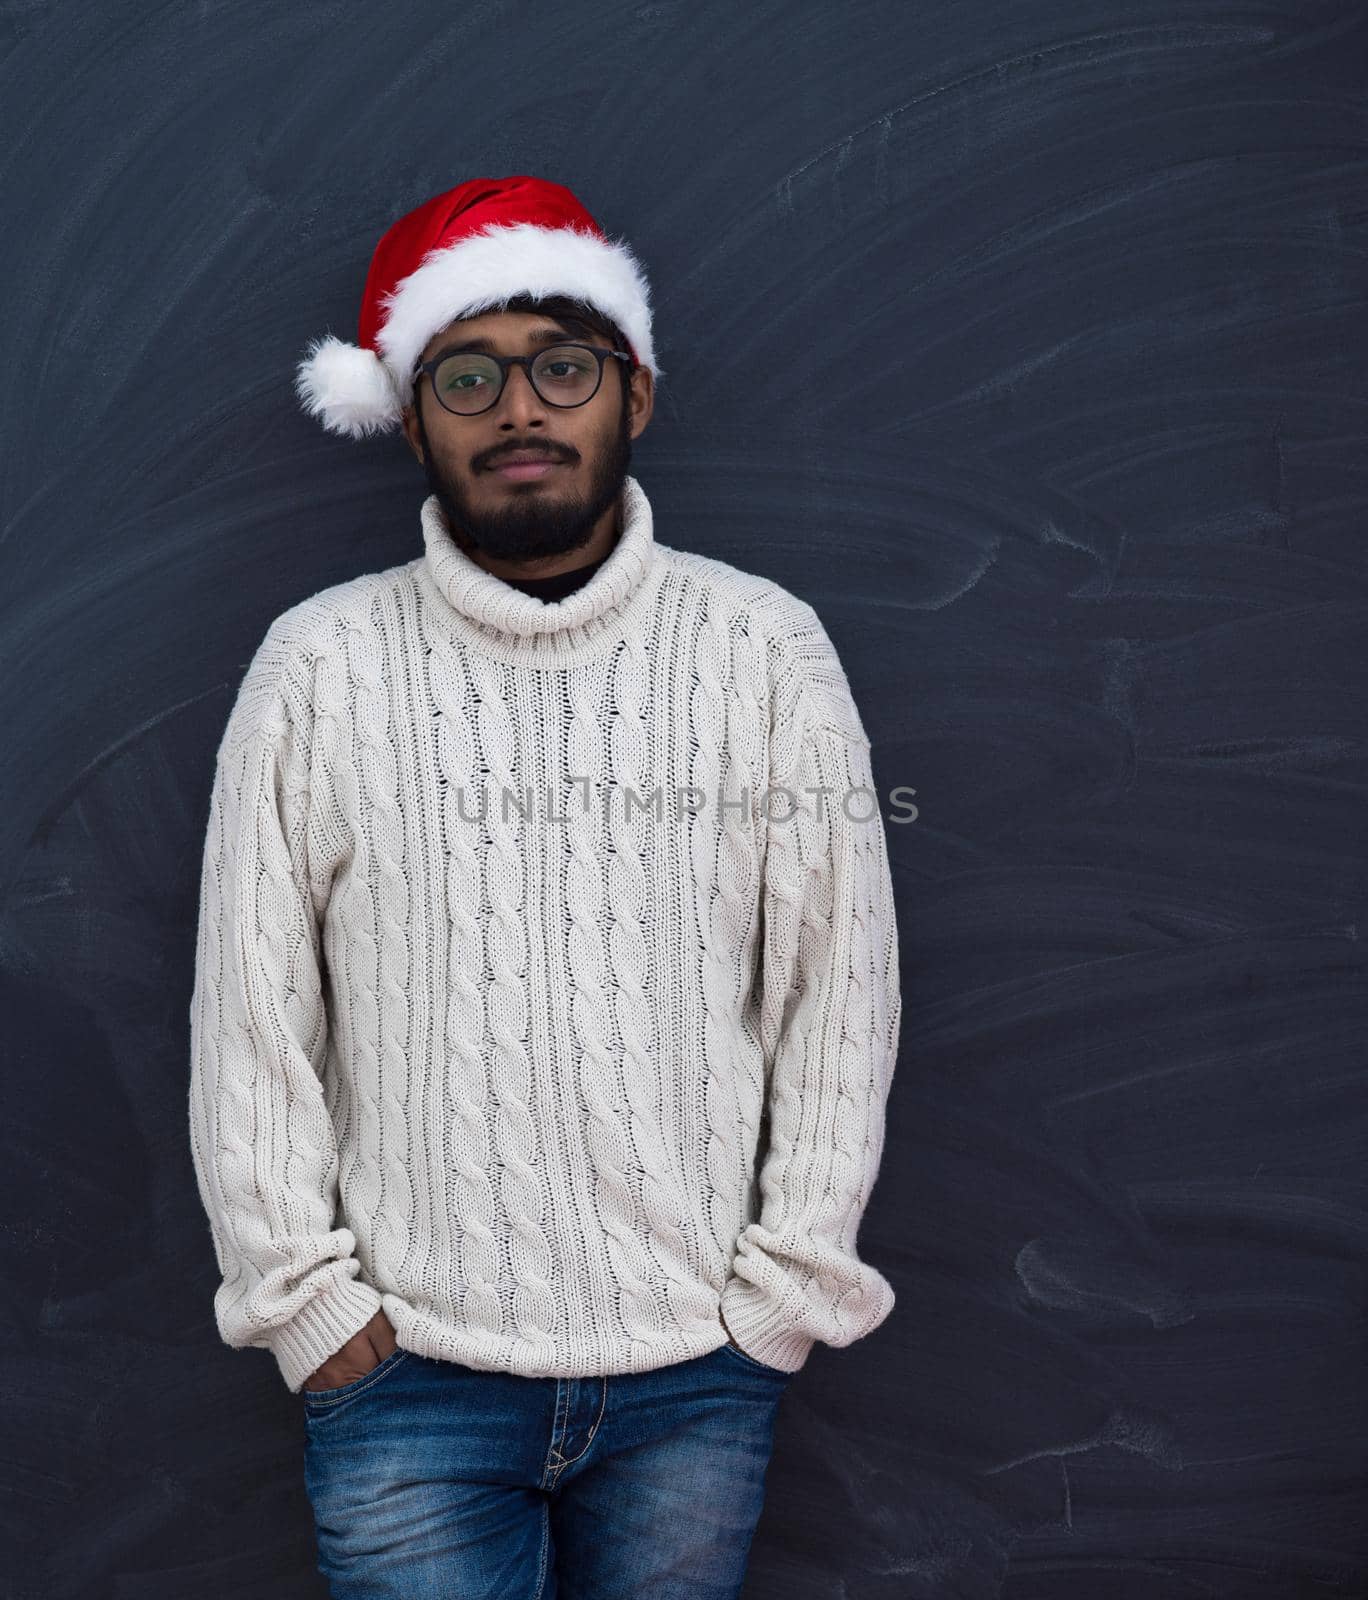 Indian man wearing traditional Santa Claus hat and white sweater  on chalkboard  background studio dark-skinned Christmas santa new year party